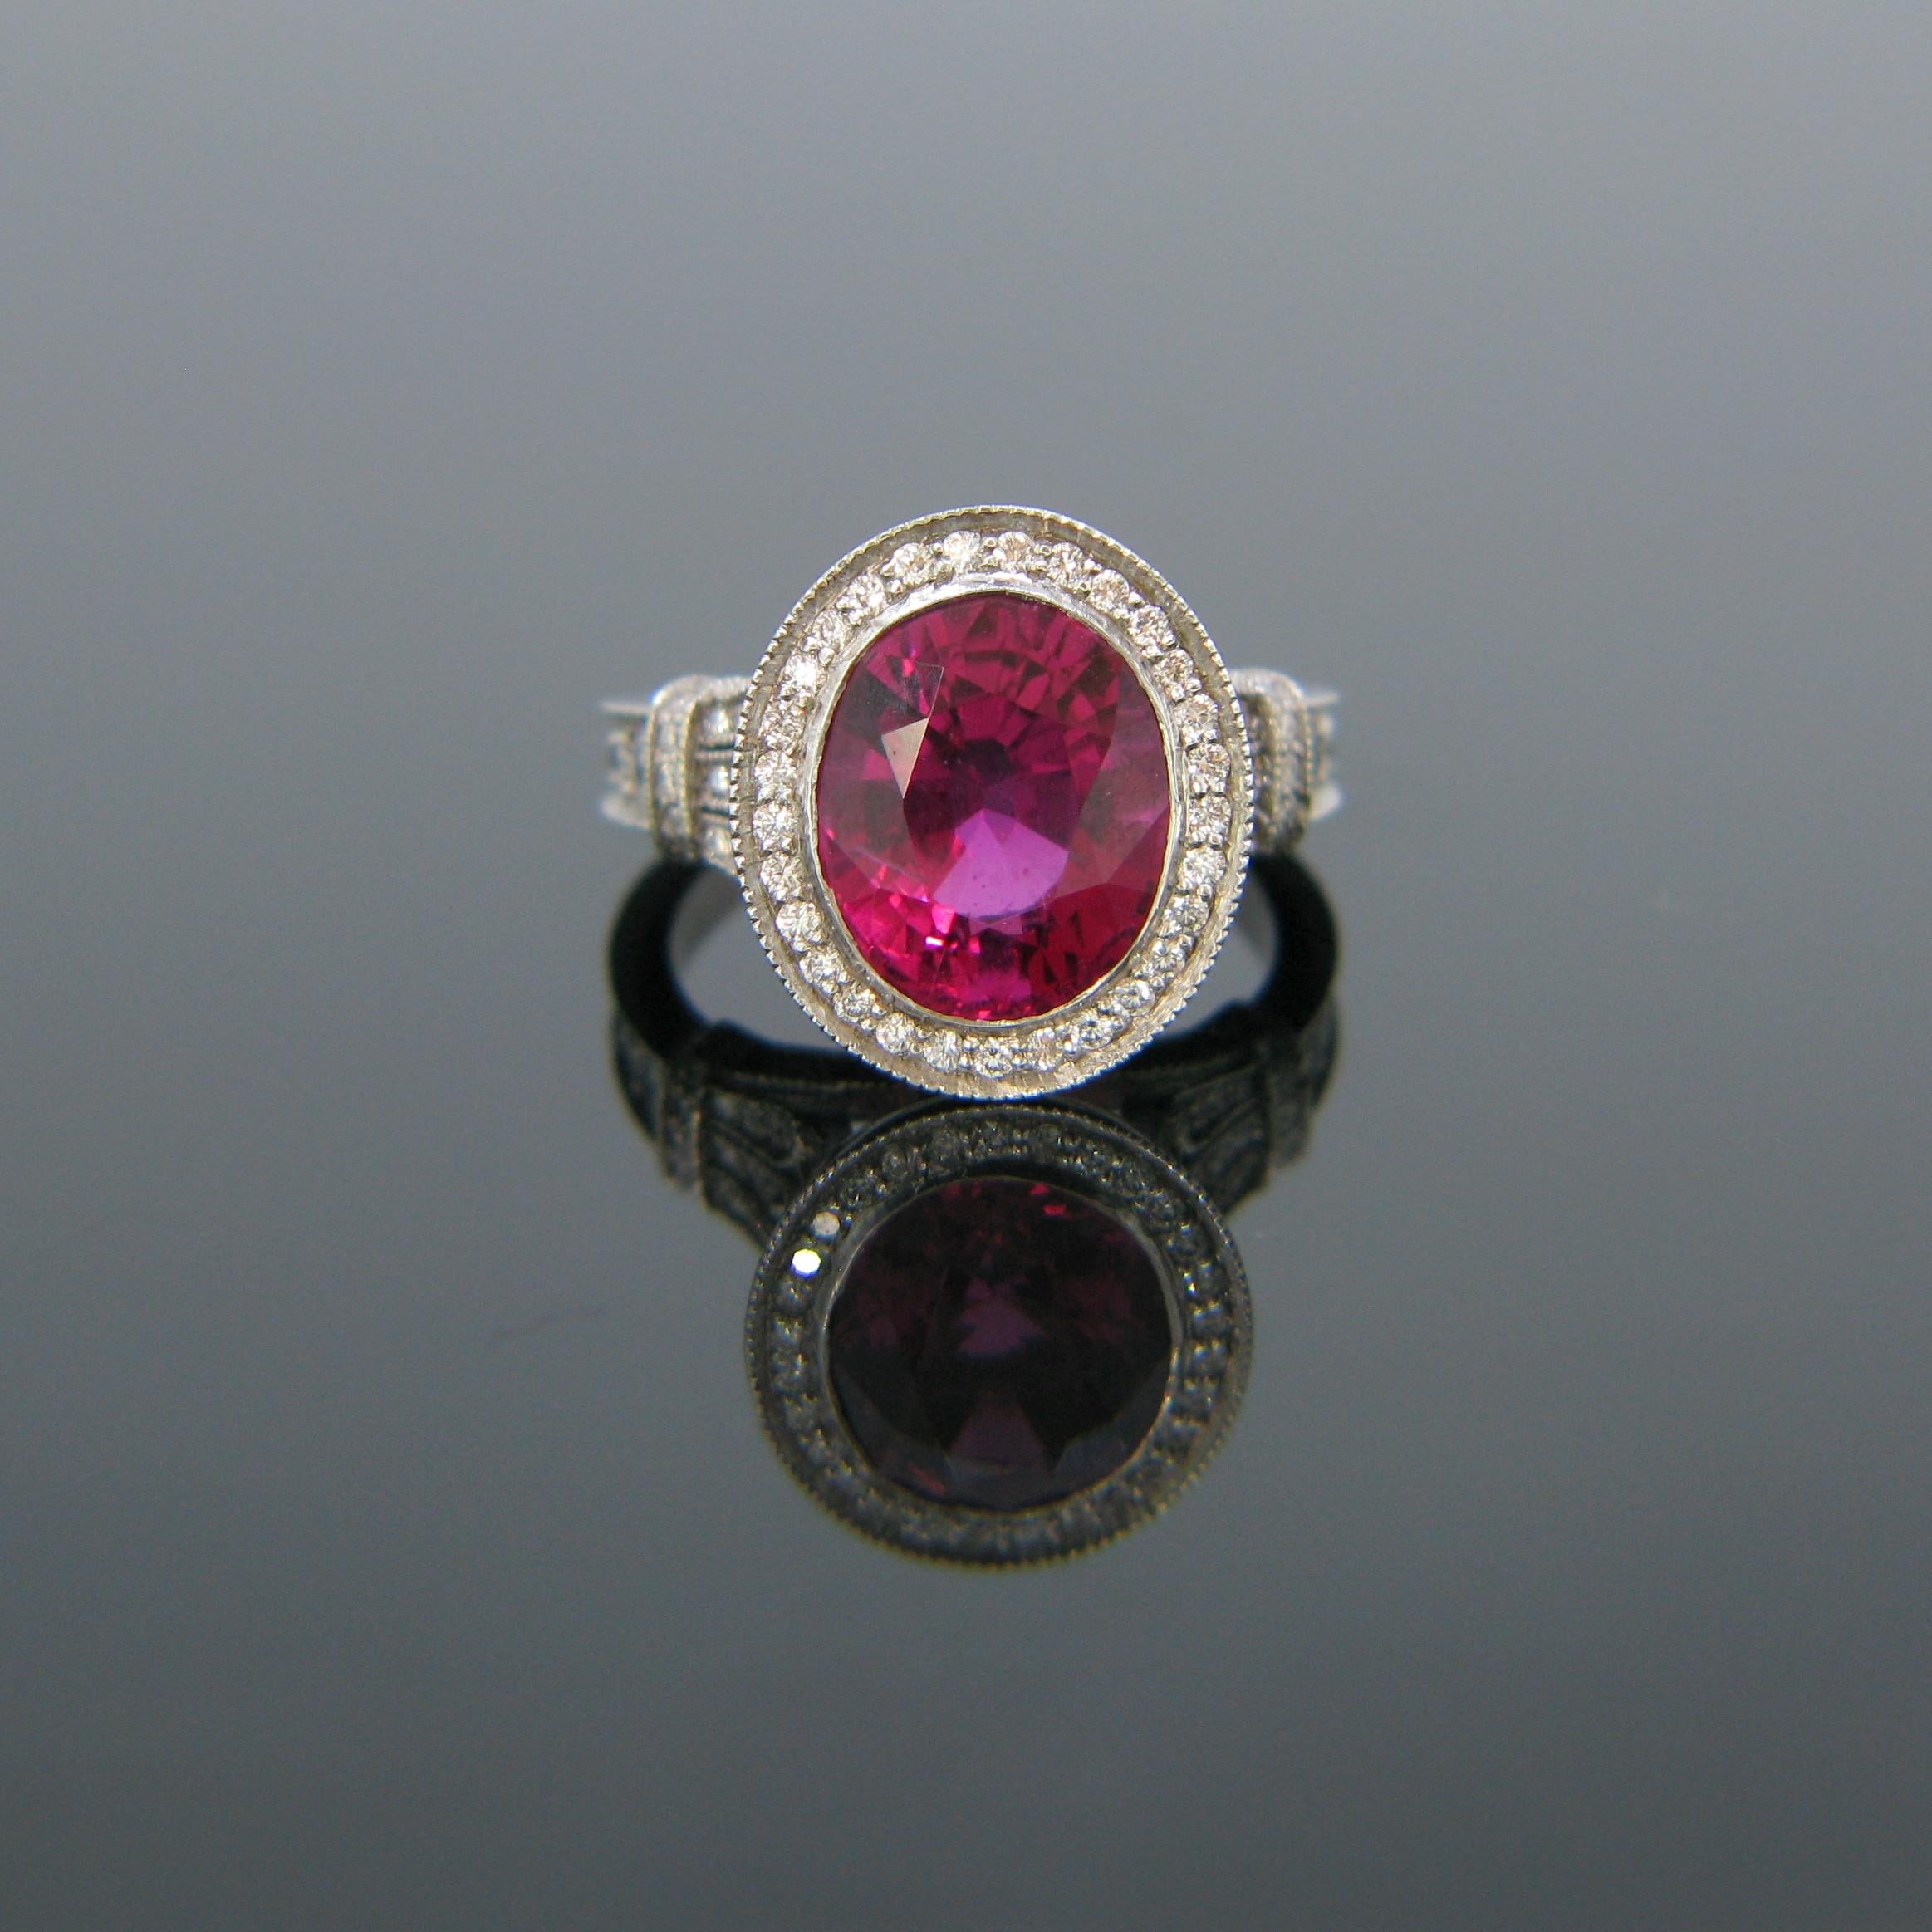 This new ring features a pink Rubellite tourmaline with a vibrant colour; it weighs 5.40ct. The ring is made in 18kt white gold and has 133 round brilliant cut diamonds set on the mount. Pink tourmaline is known for bringing an influx of love, joy